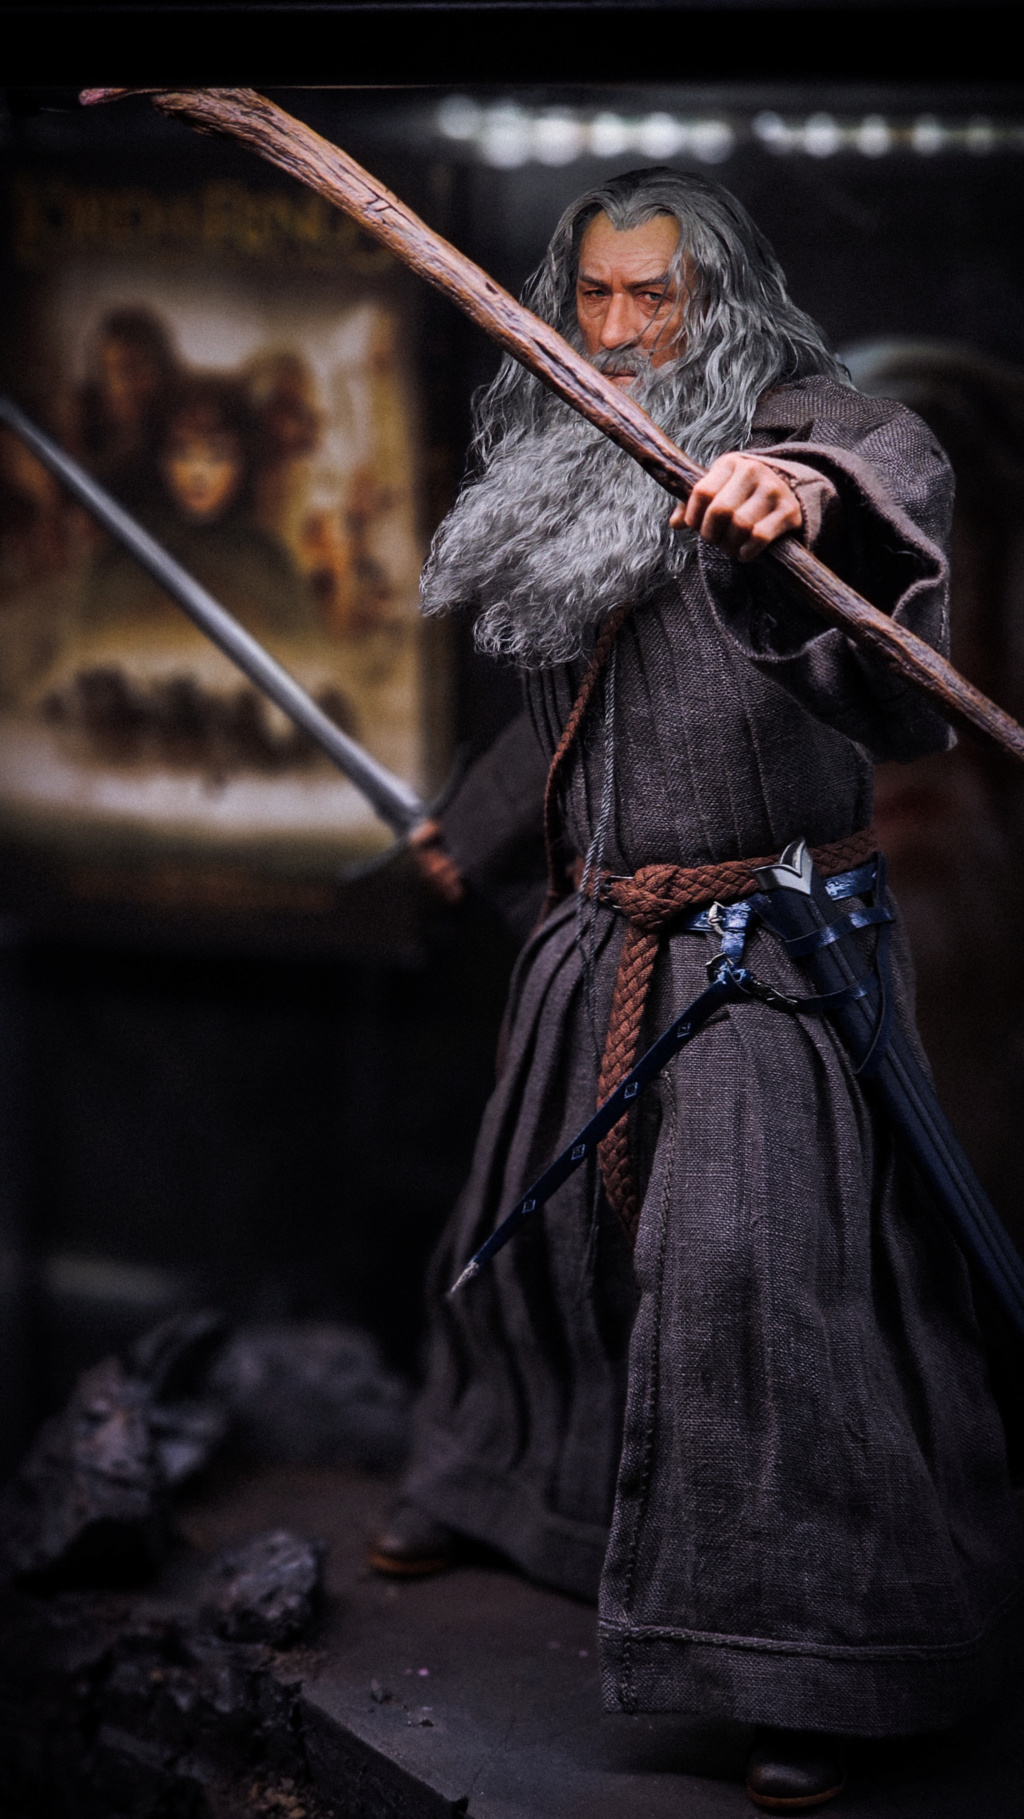 LordoftheRings - NEW PRODUCT: Queen Studios & INART: 1/6 The Lord of the Rings Gandalf (Grey Robe) Action Figure - Page 4 47760310